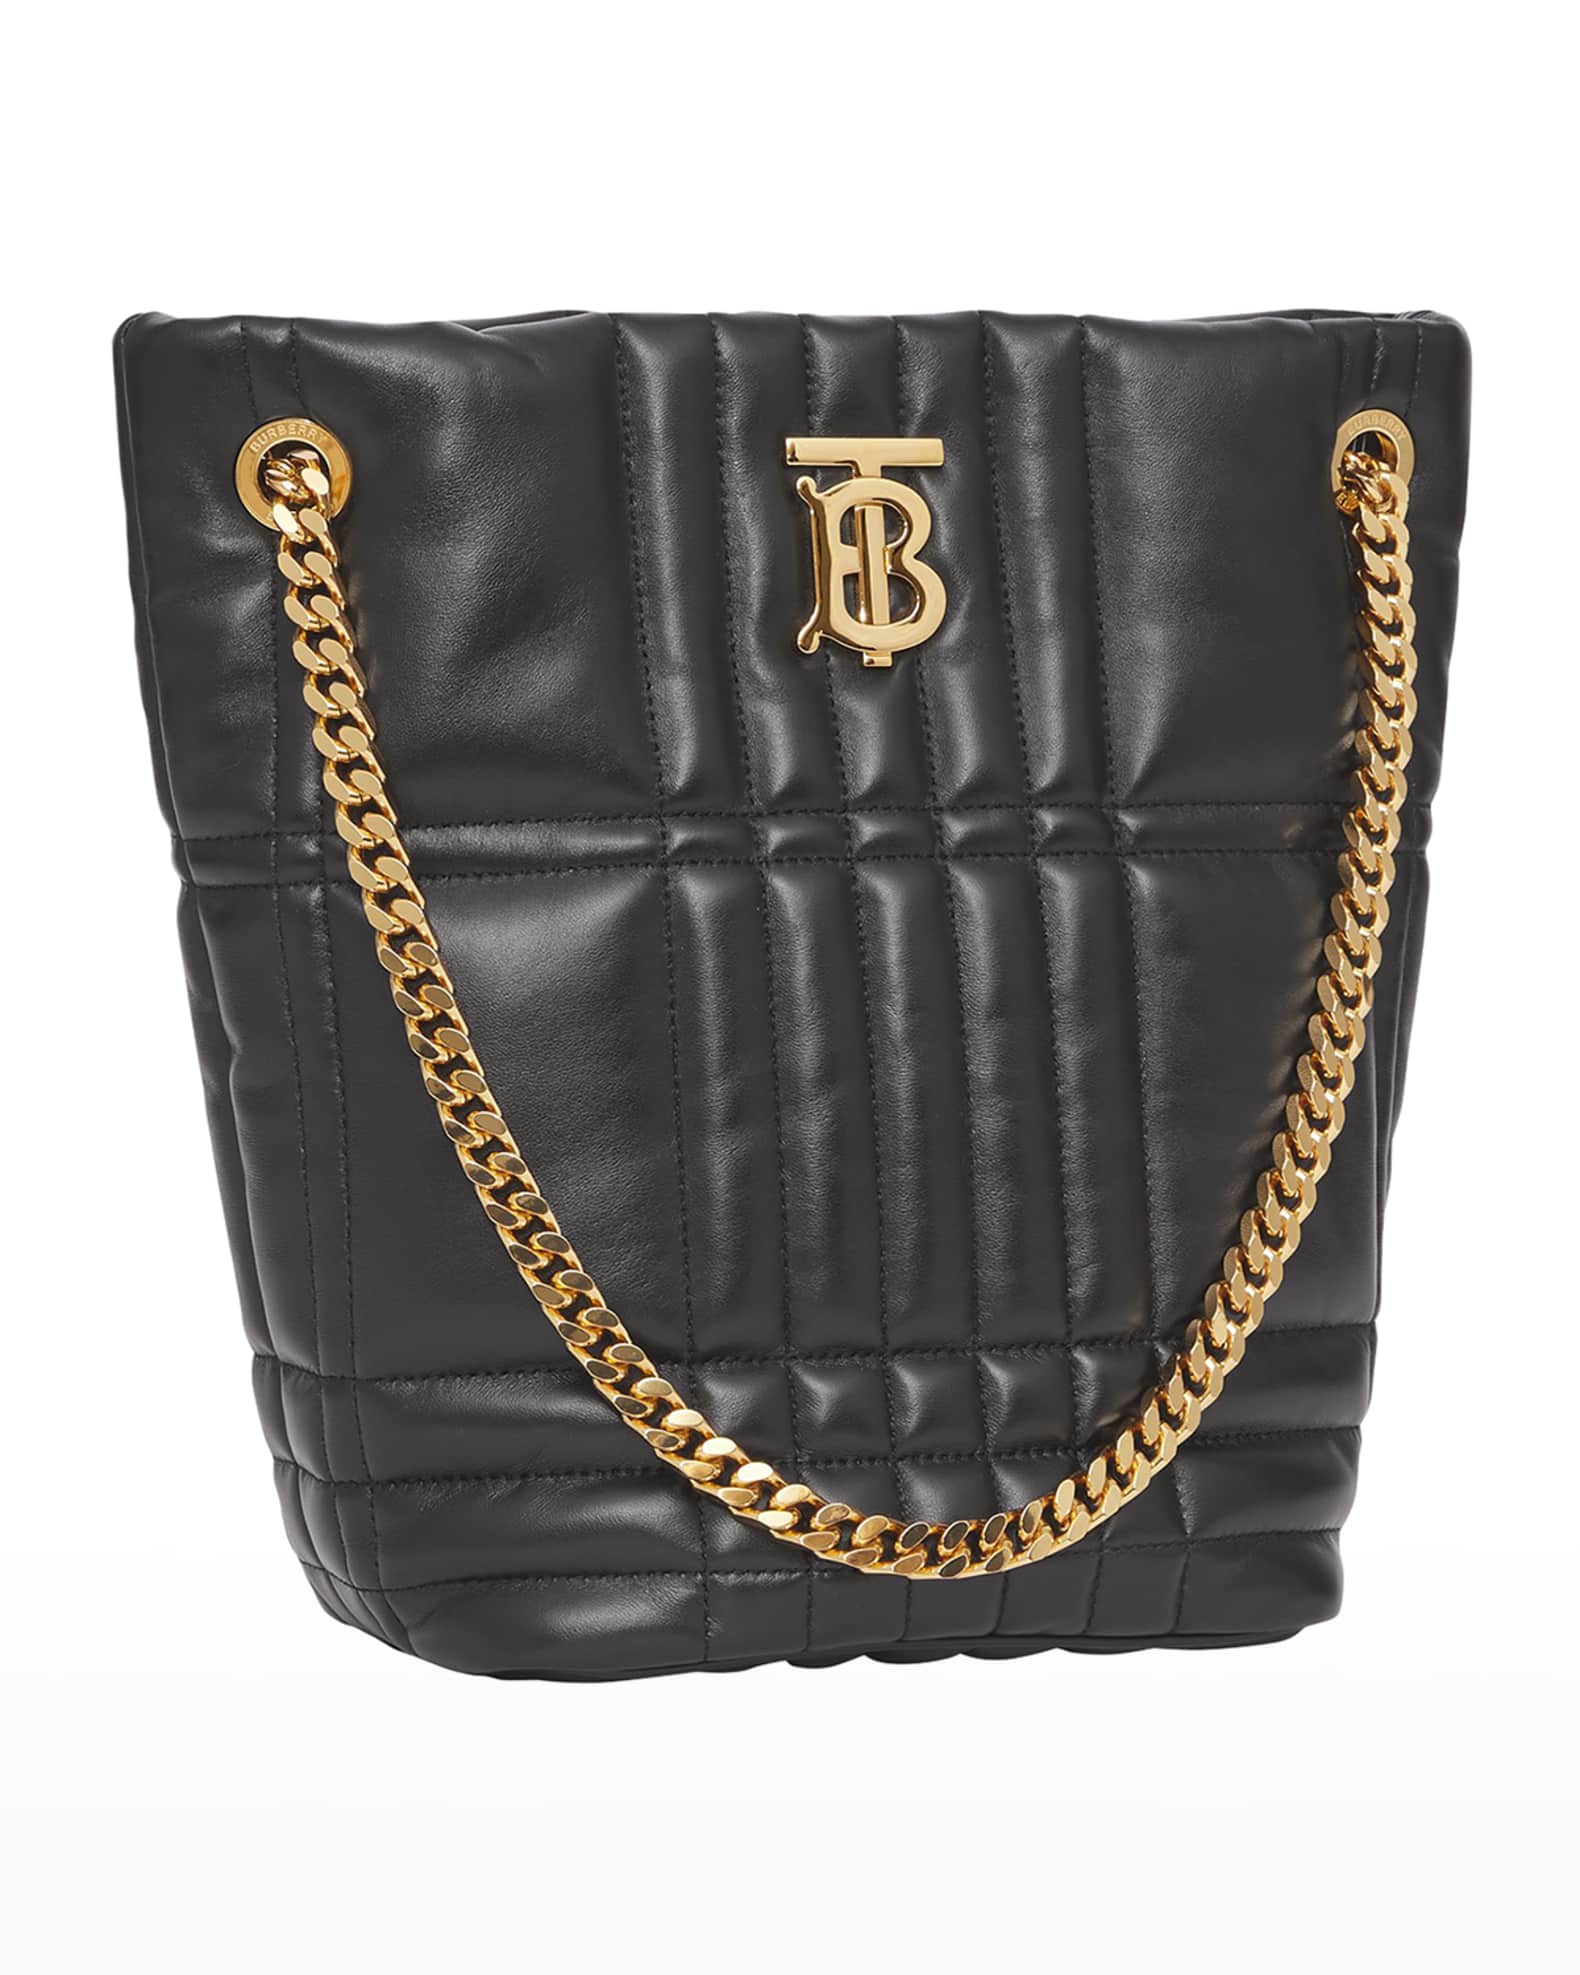 Burberry Lola Small TB Quilted Leather Chain Bucket Bag | Neiman Marcus